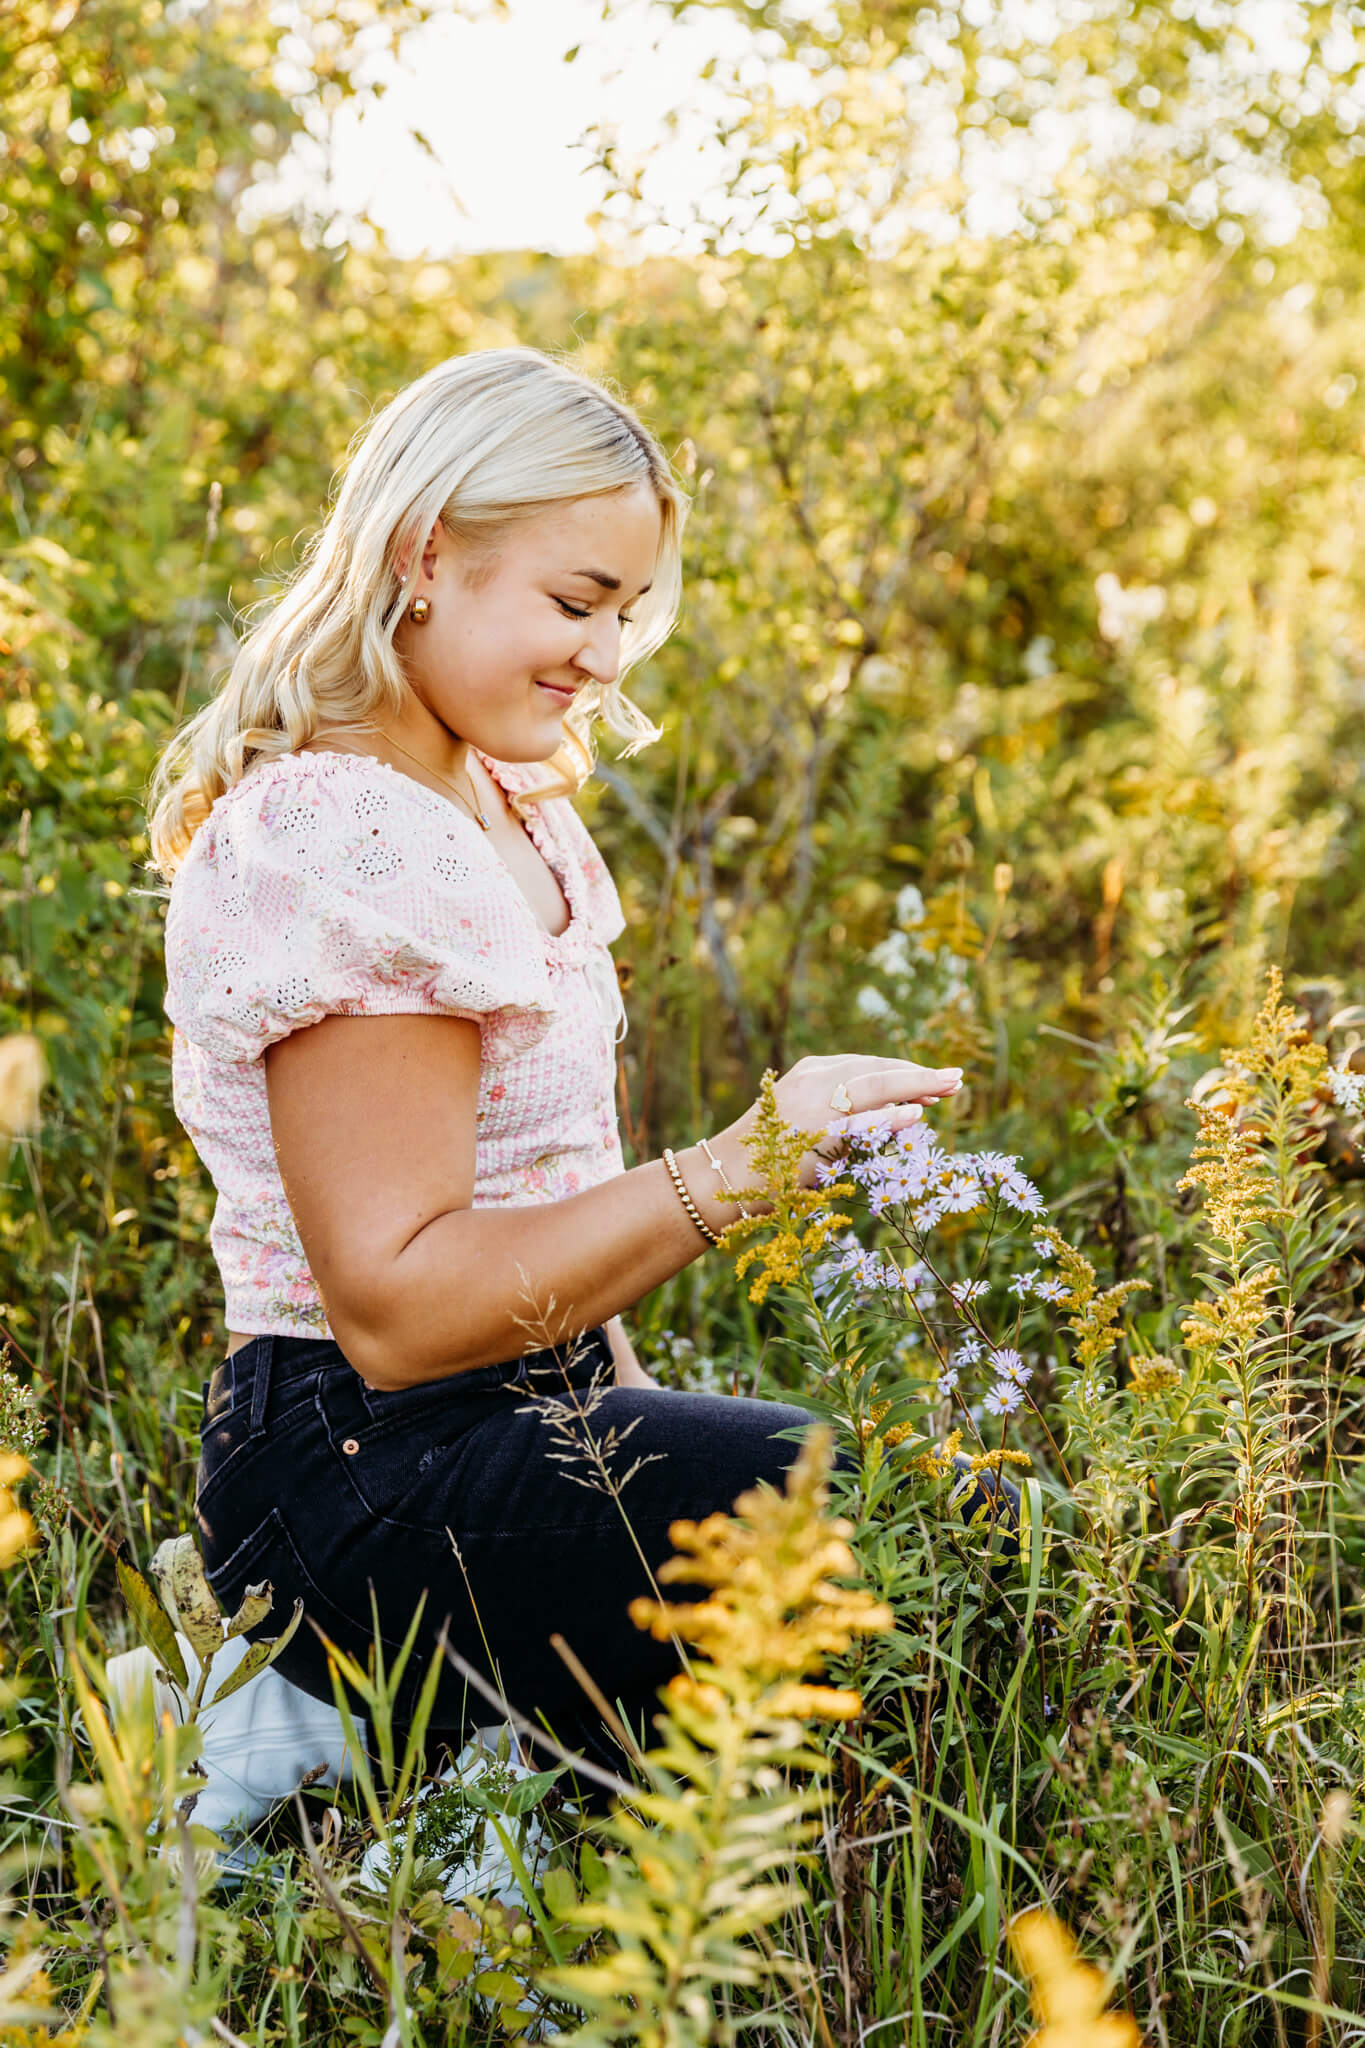 beautiful blonde high school senior kneeling next to flowers and playing with them as she smiles